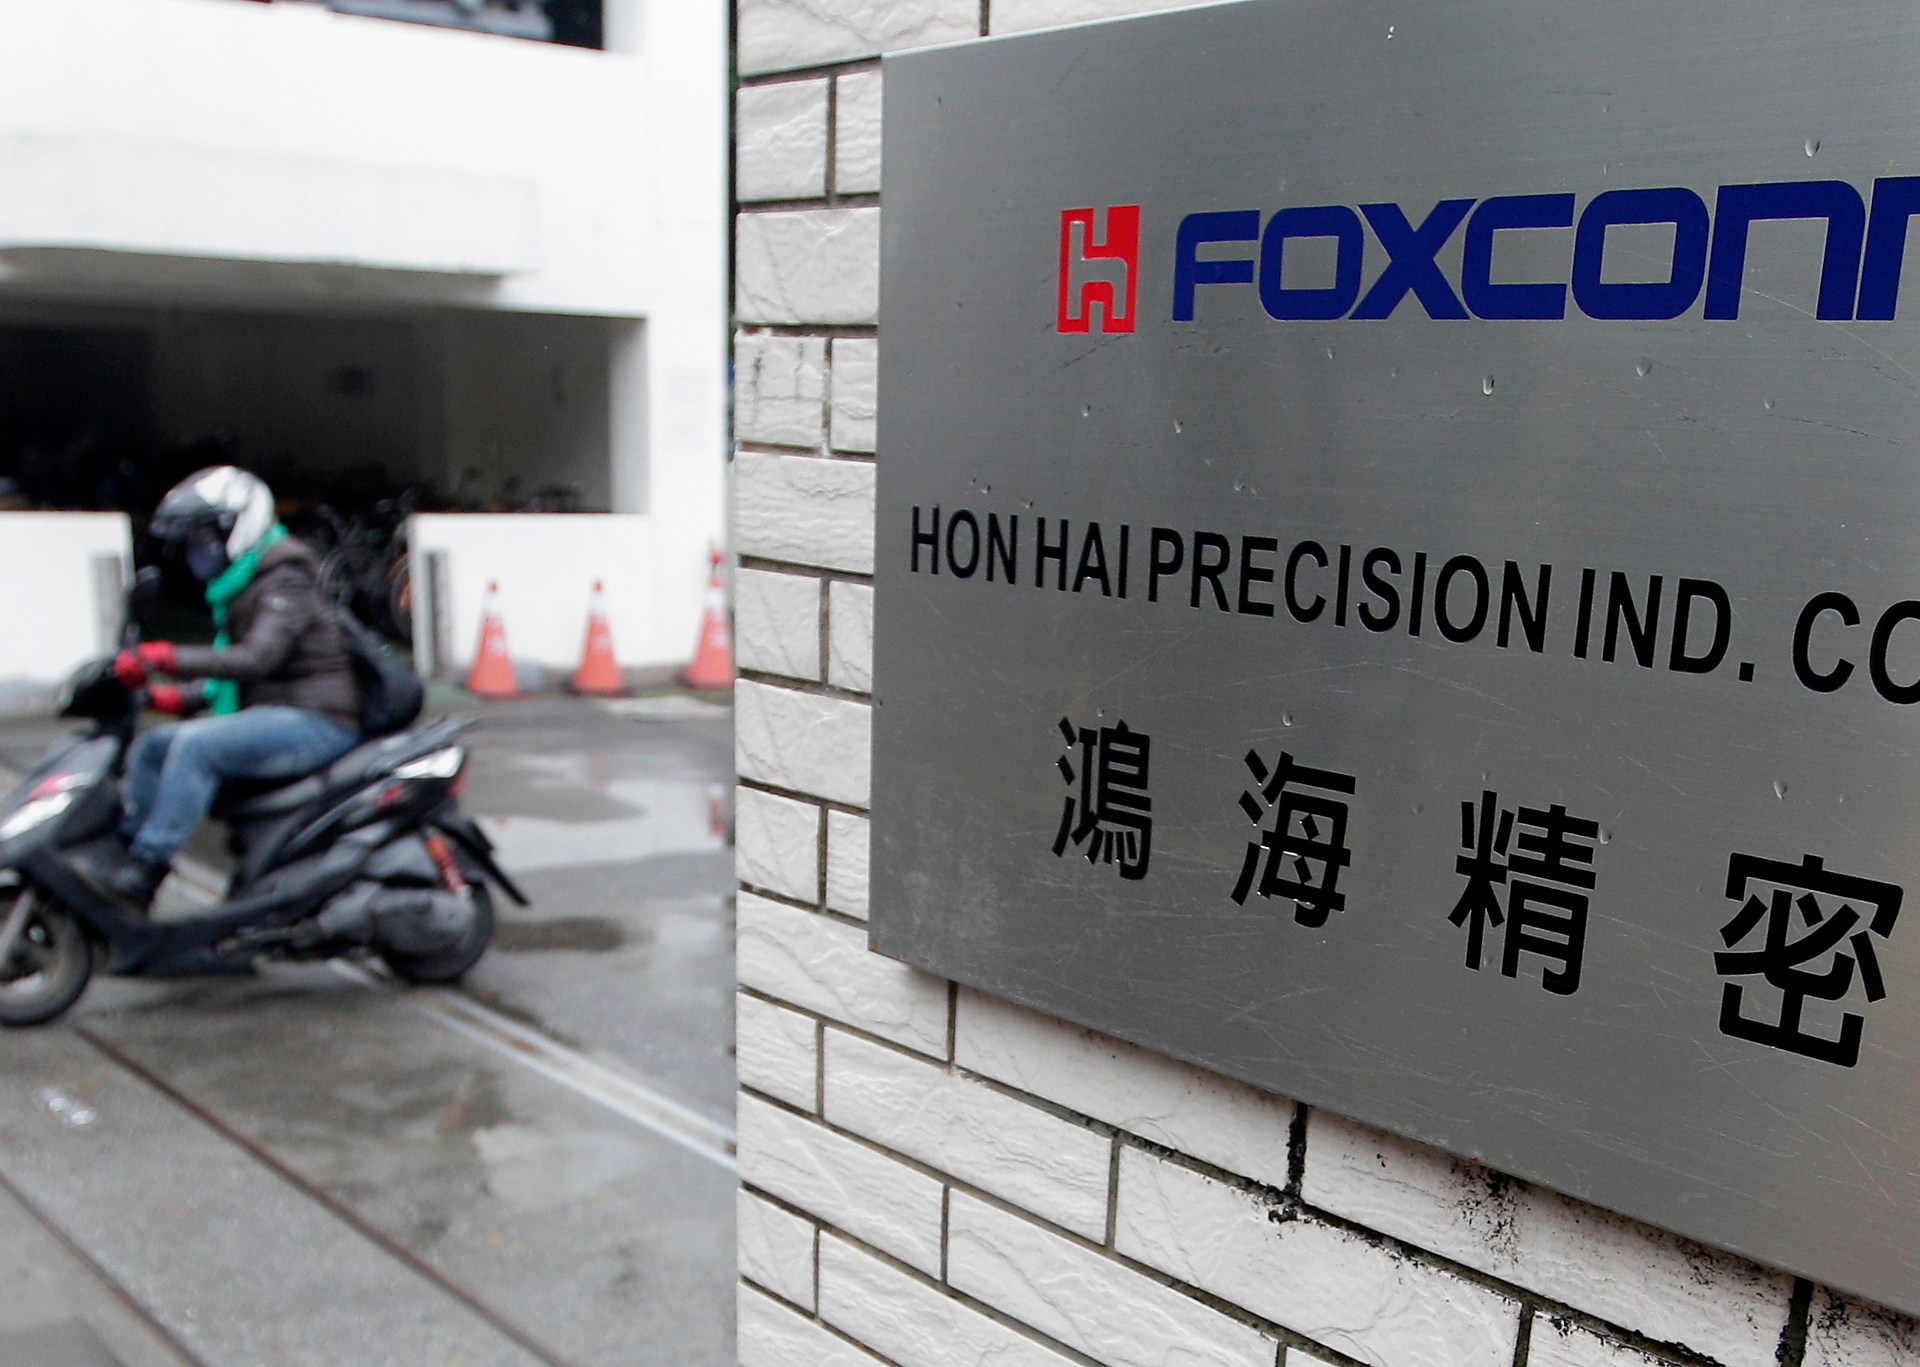 Foxconn shares slide after report says China probing taxes, land use | Technology